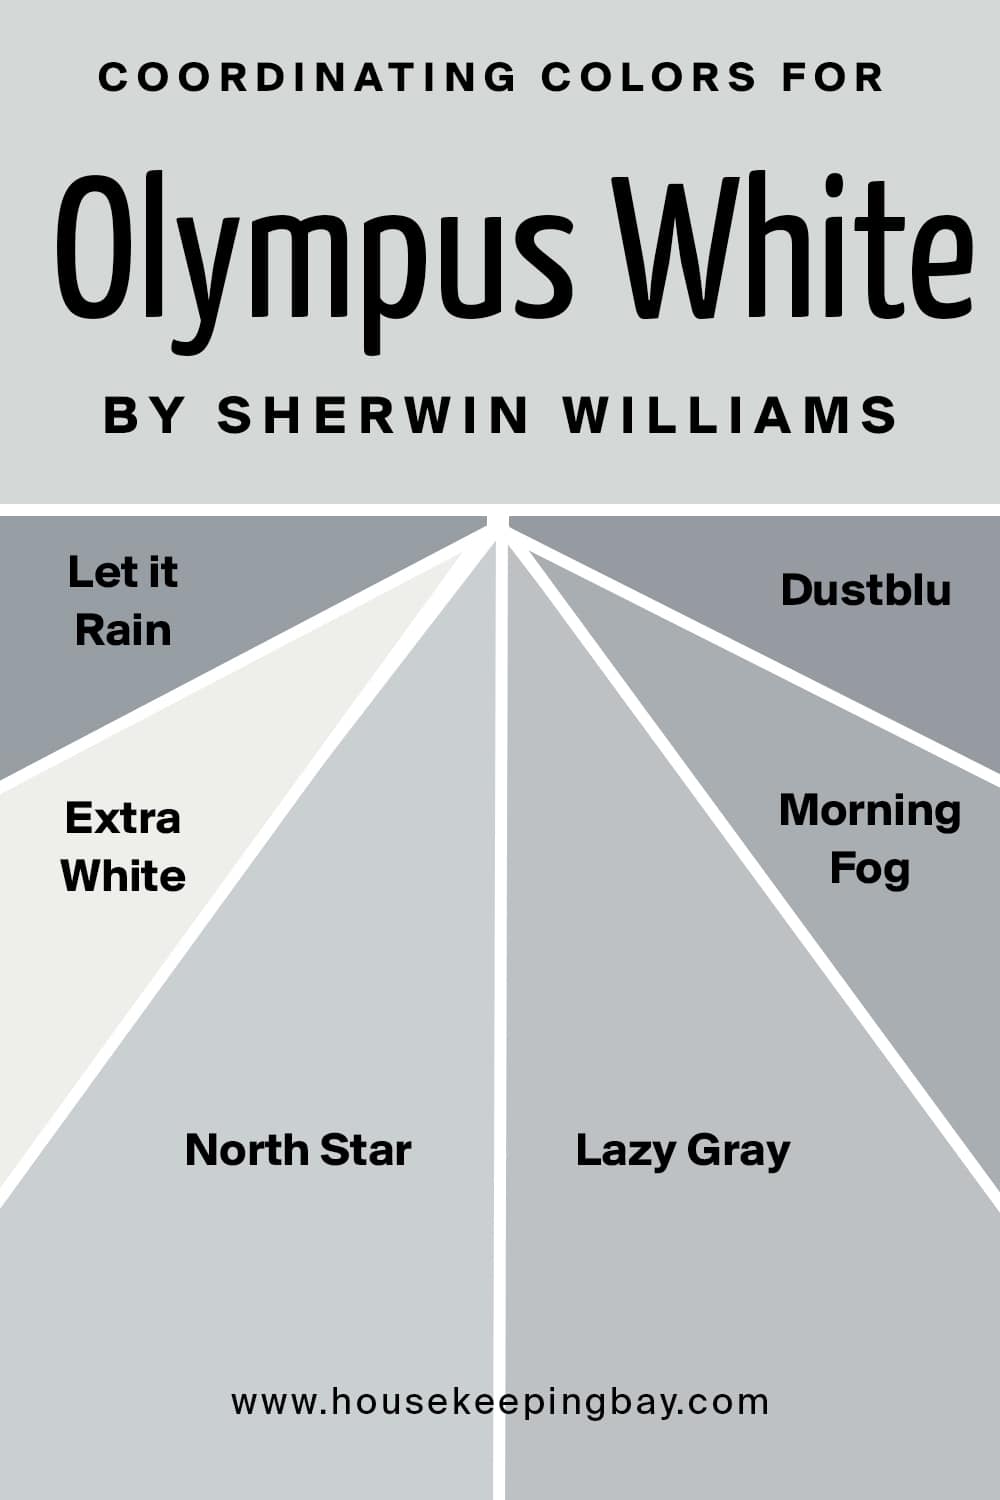 Coordinating Colors for Olympus White by Sherwin Williams